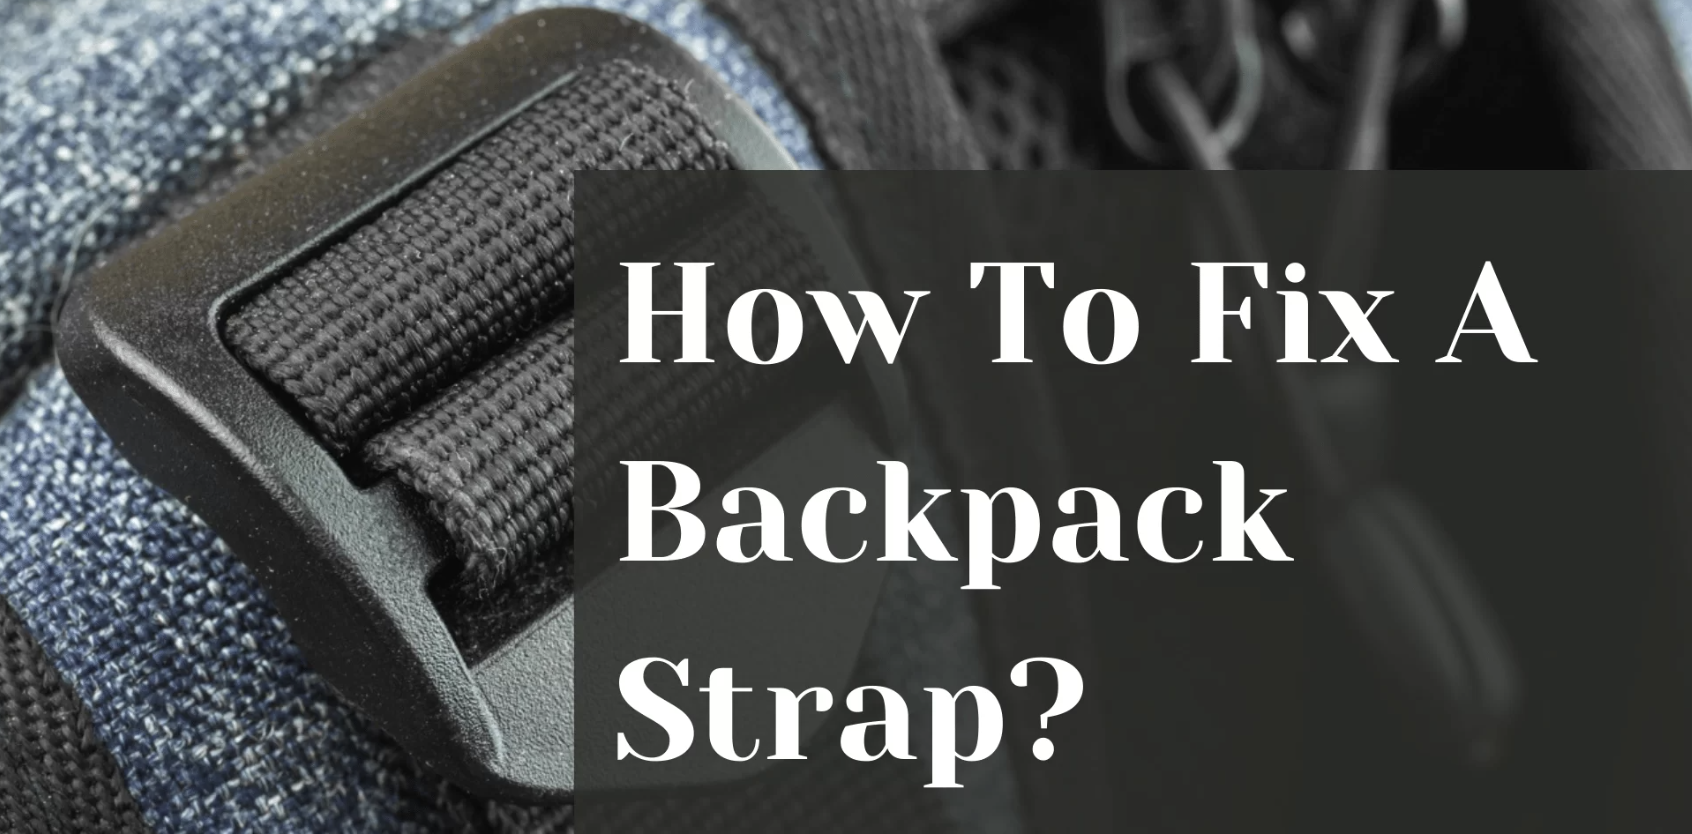 How to Fix a Backpack Strap